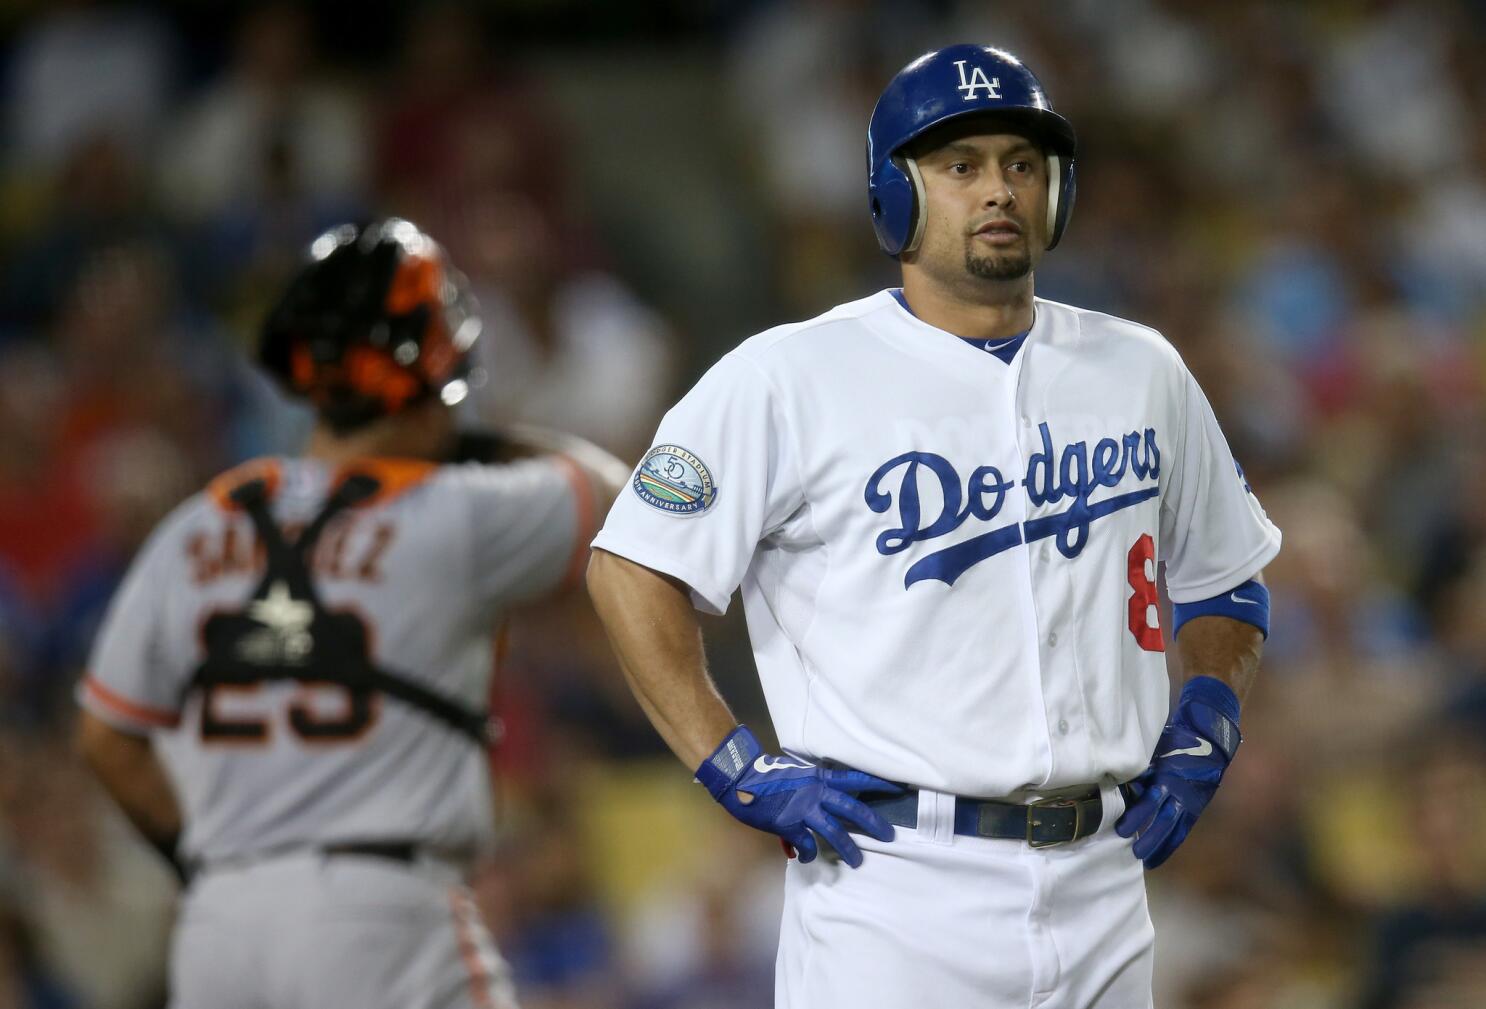 Shane Victorino traded to Dodgers, ending eight-year run in